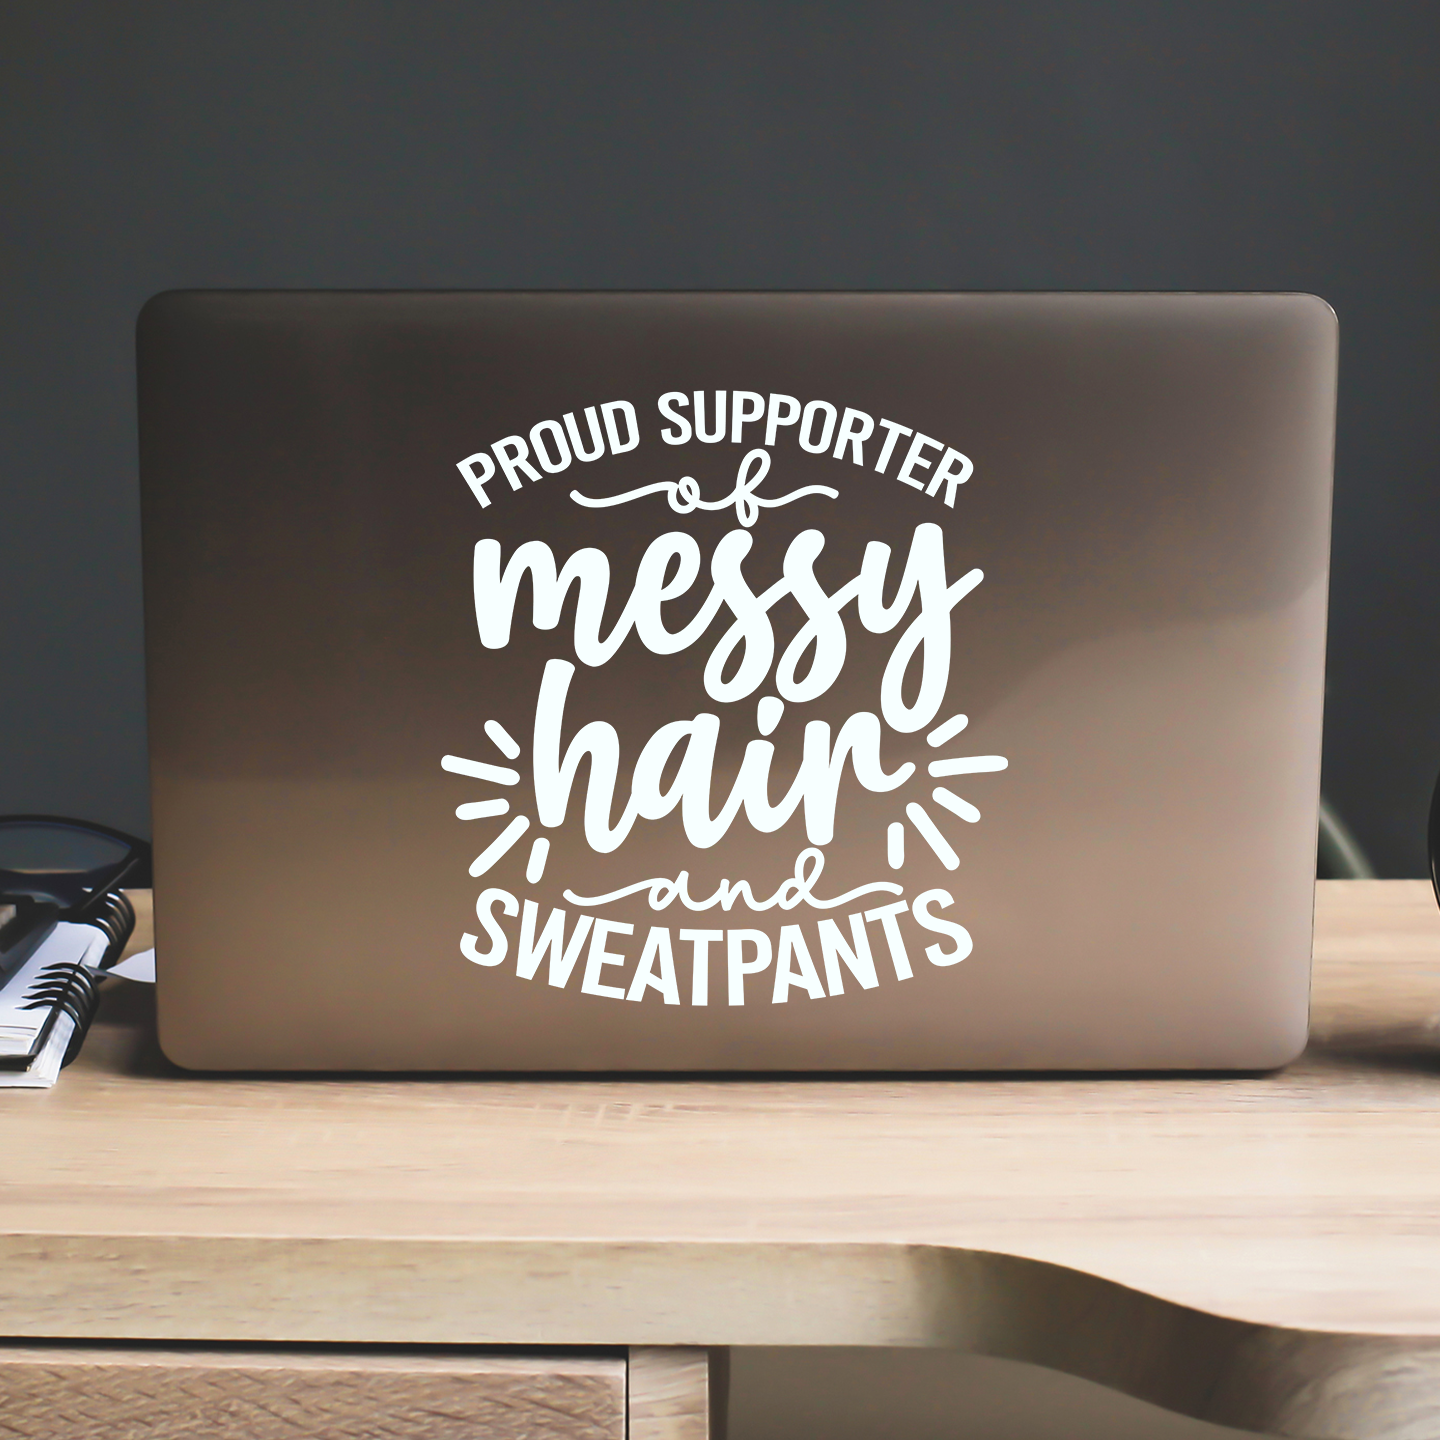 Supporter of Messy Hair and Sweatpants Sticker